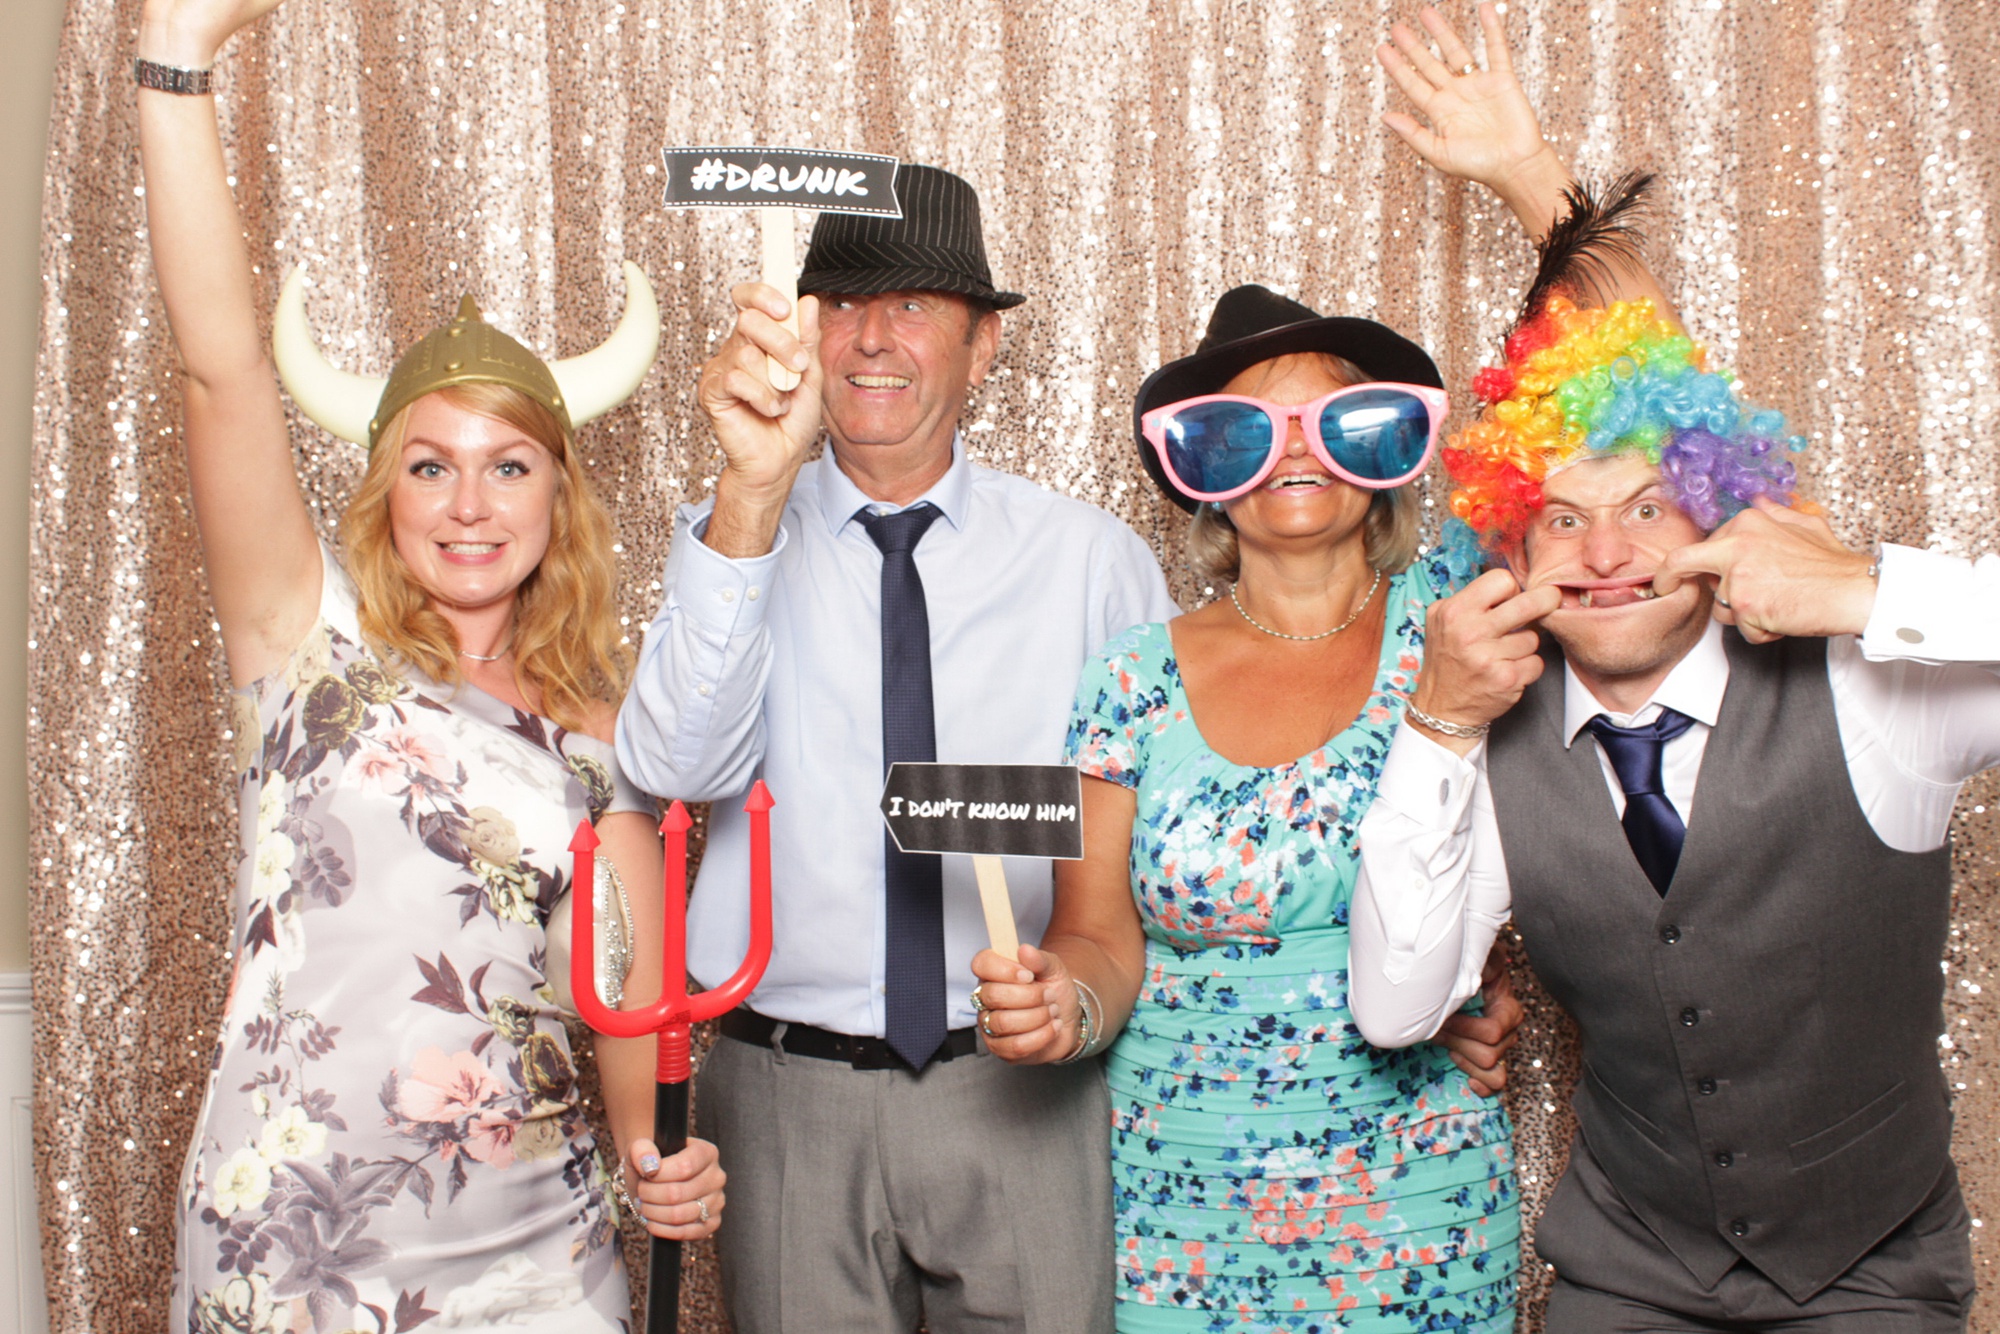 Brant Beach Yacht Club photo booth with guests wearing silly props